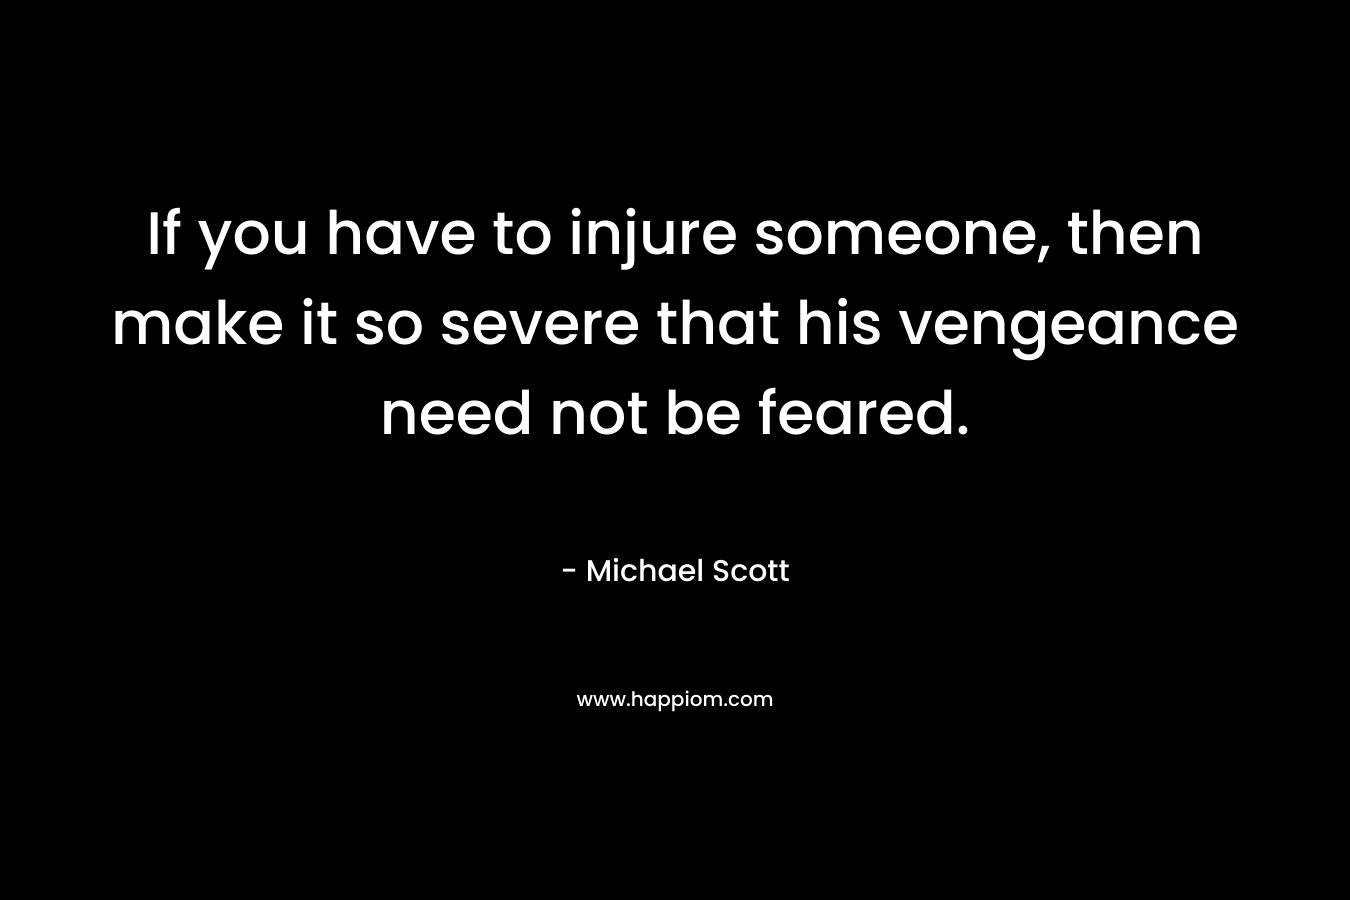 If you have to injure someone, then make it so severe that his vengeance need not be feared. – Michael Scott